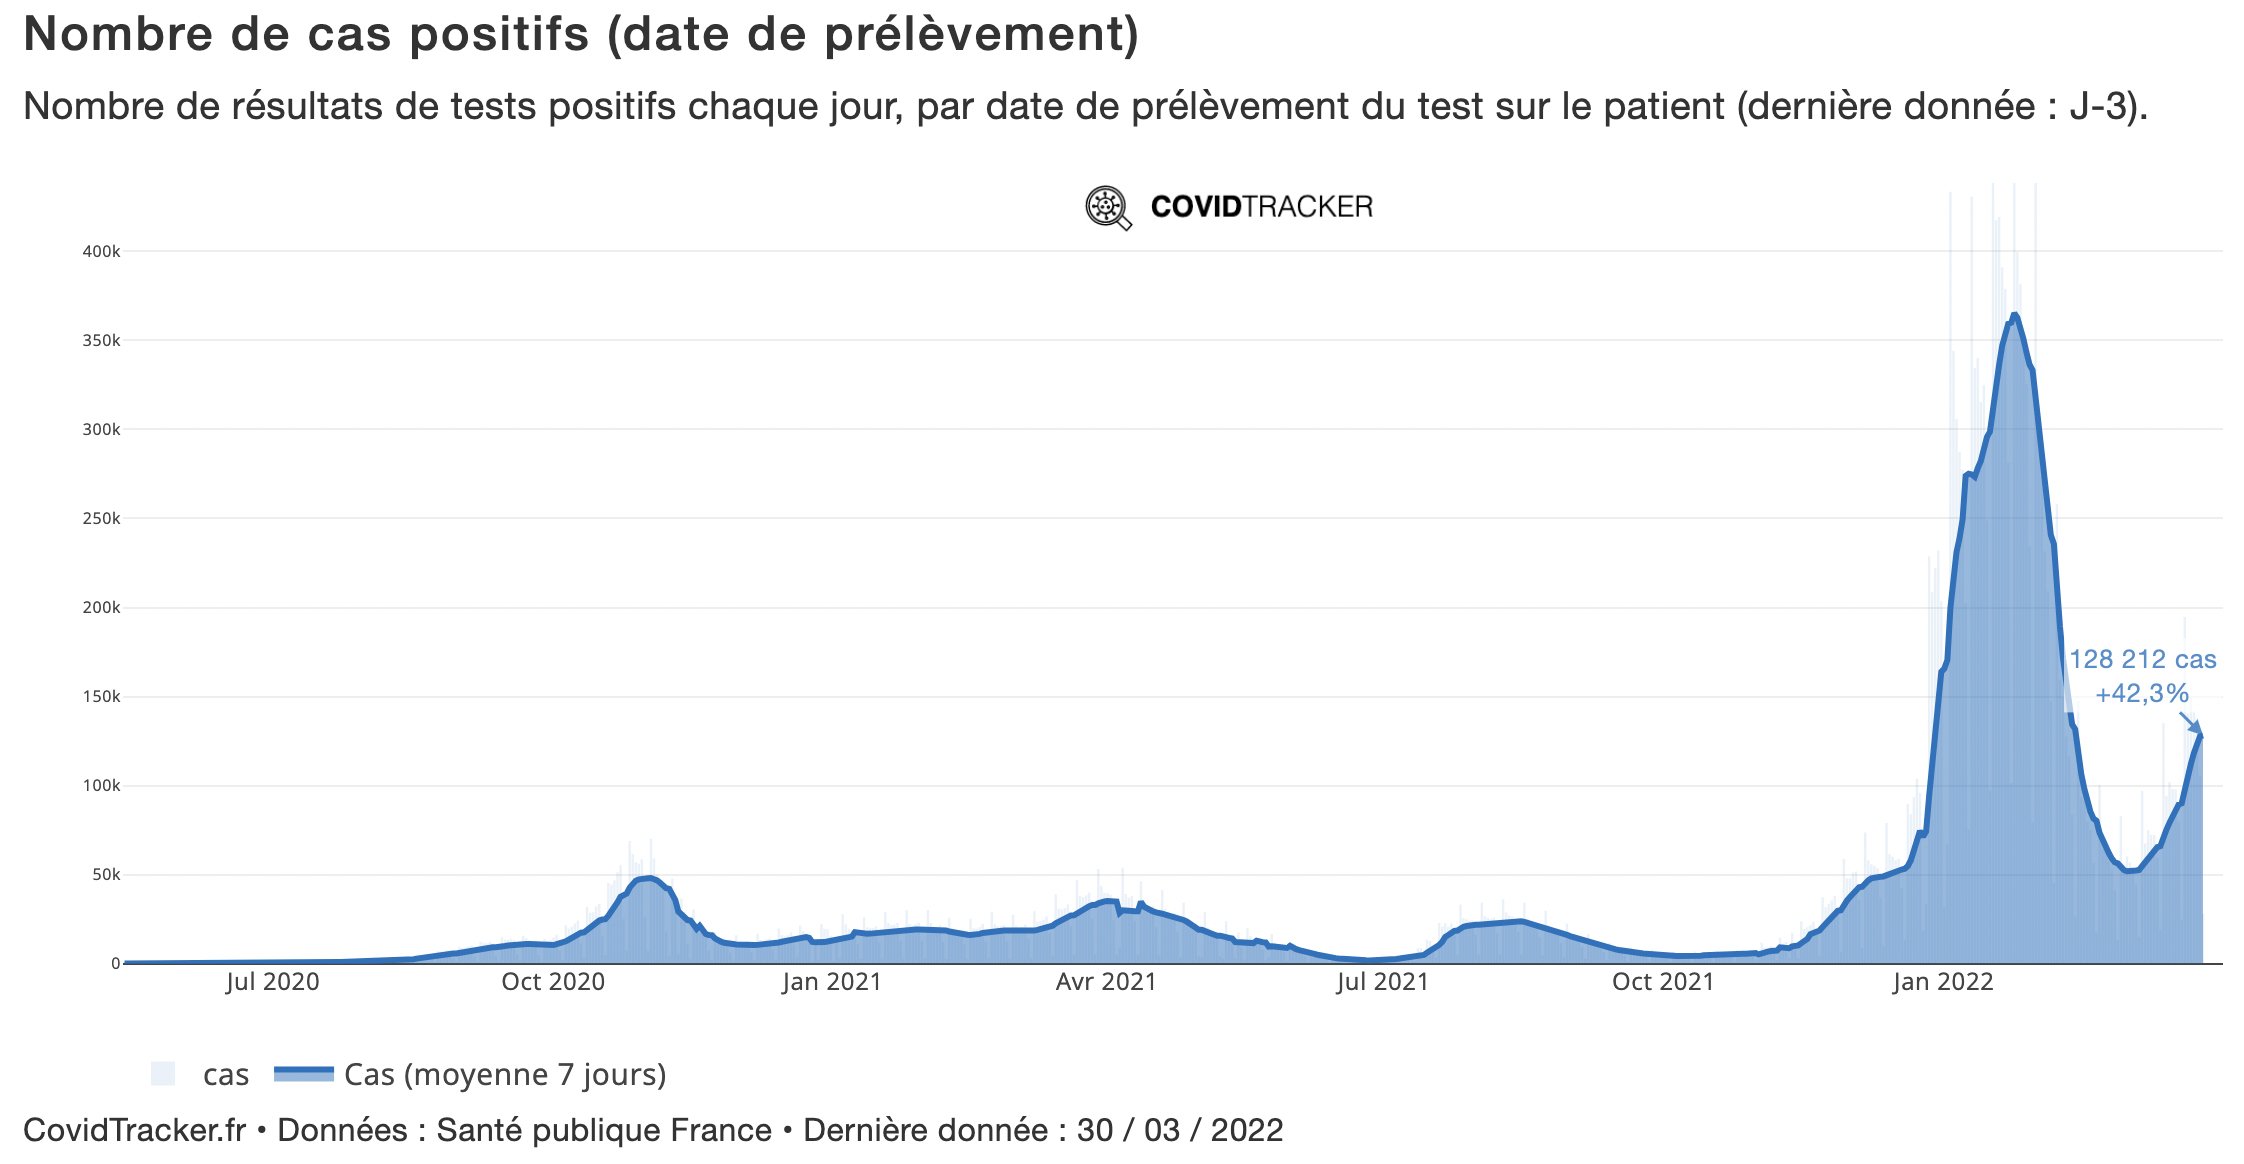 Covid case numbers are on the rise in France. 